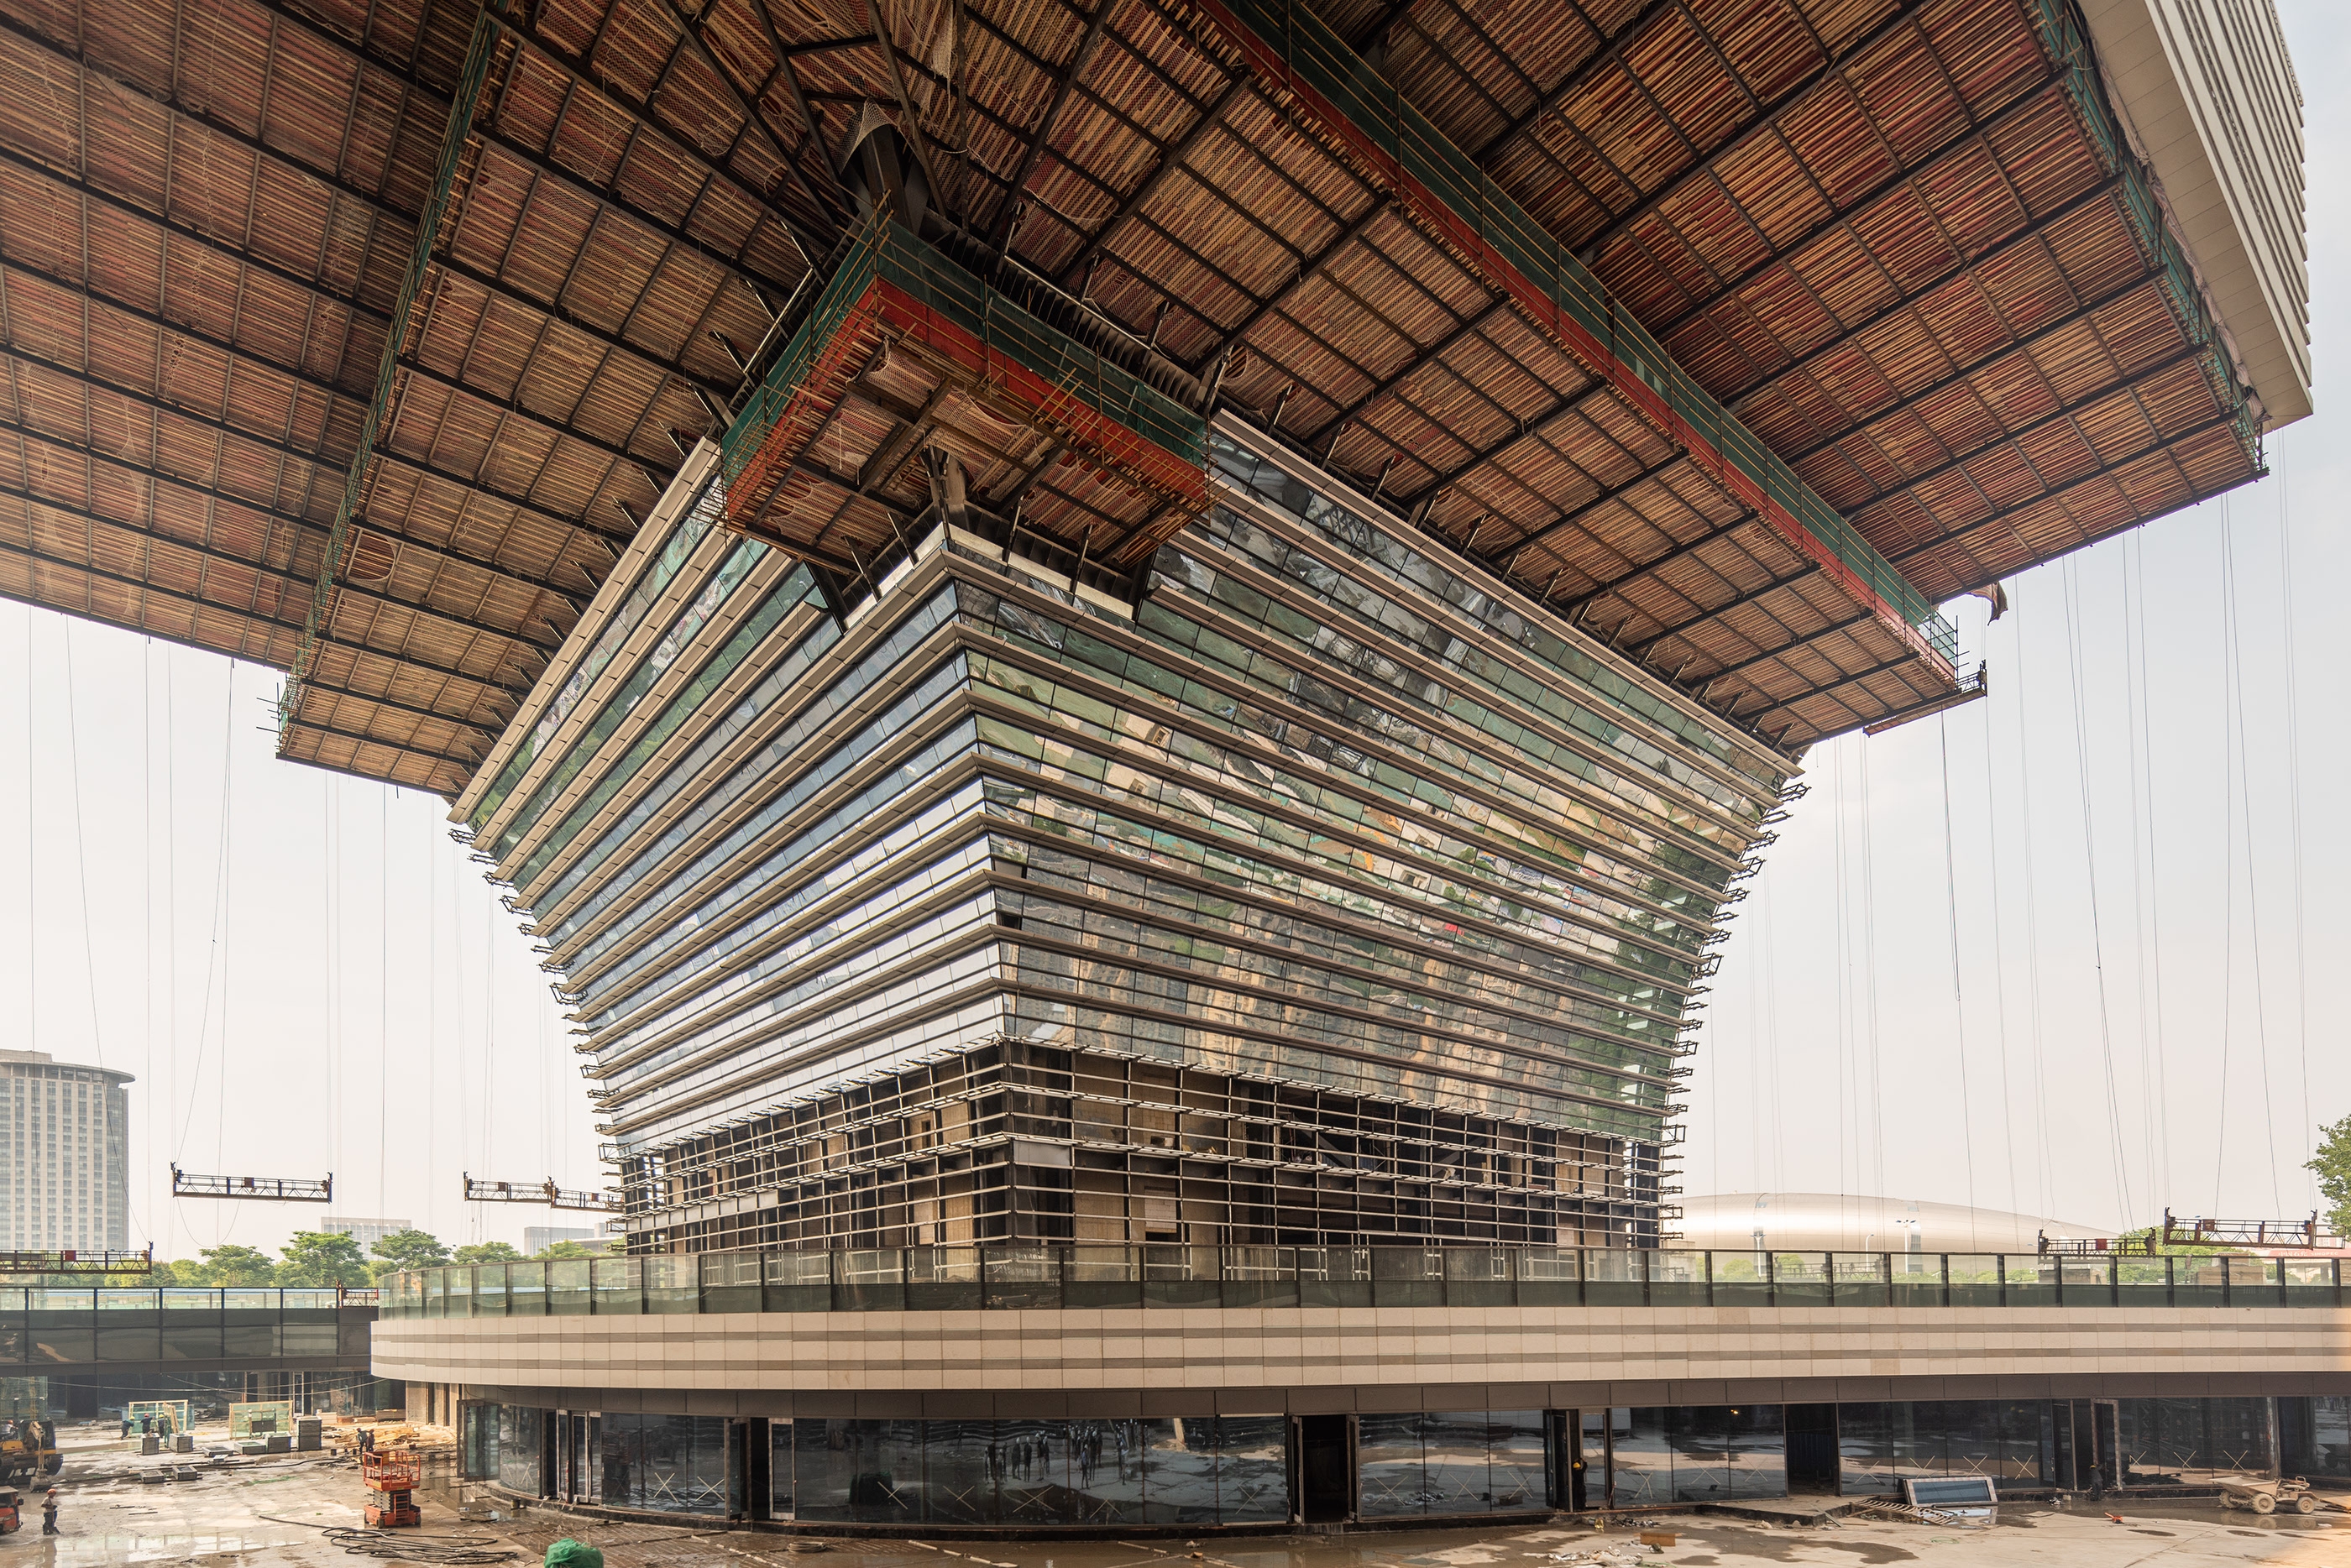 Colossal construction of an upcoming Culture Center in Changzhou, China